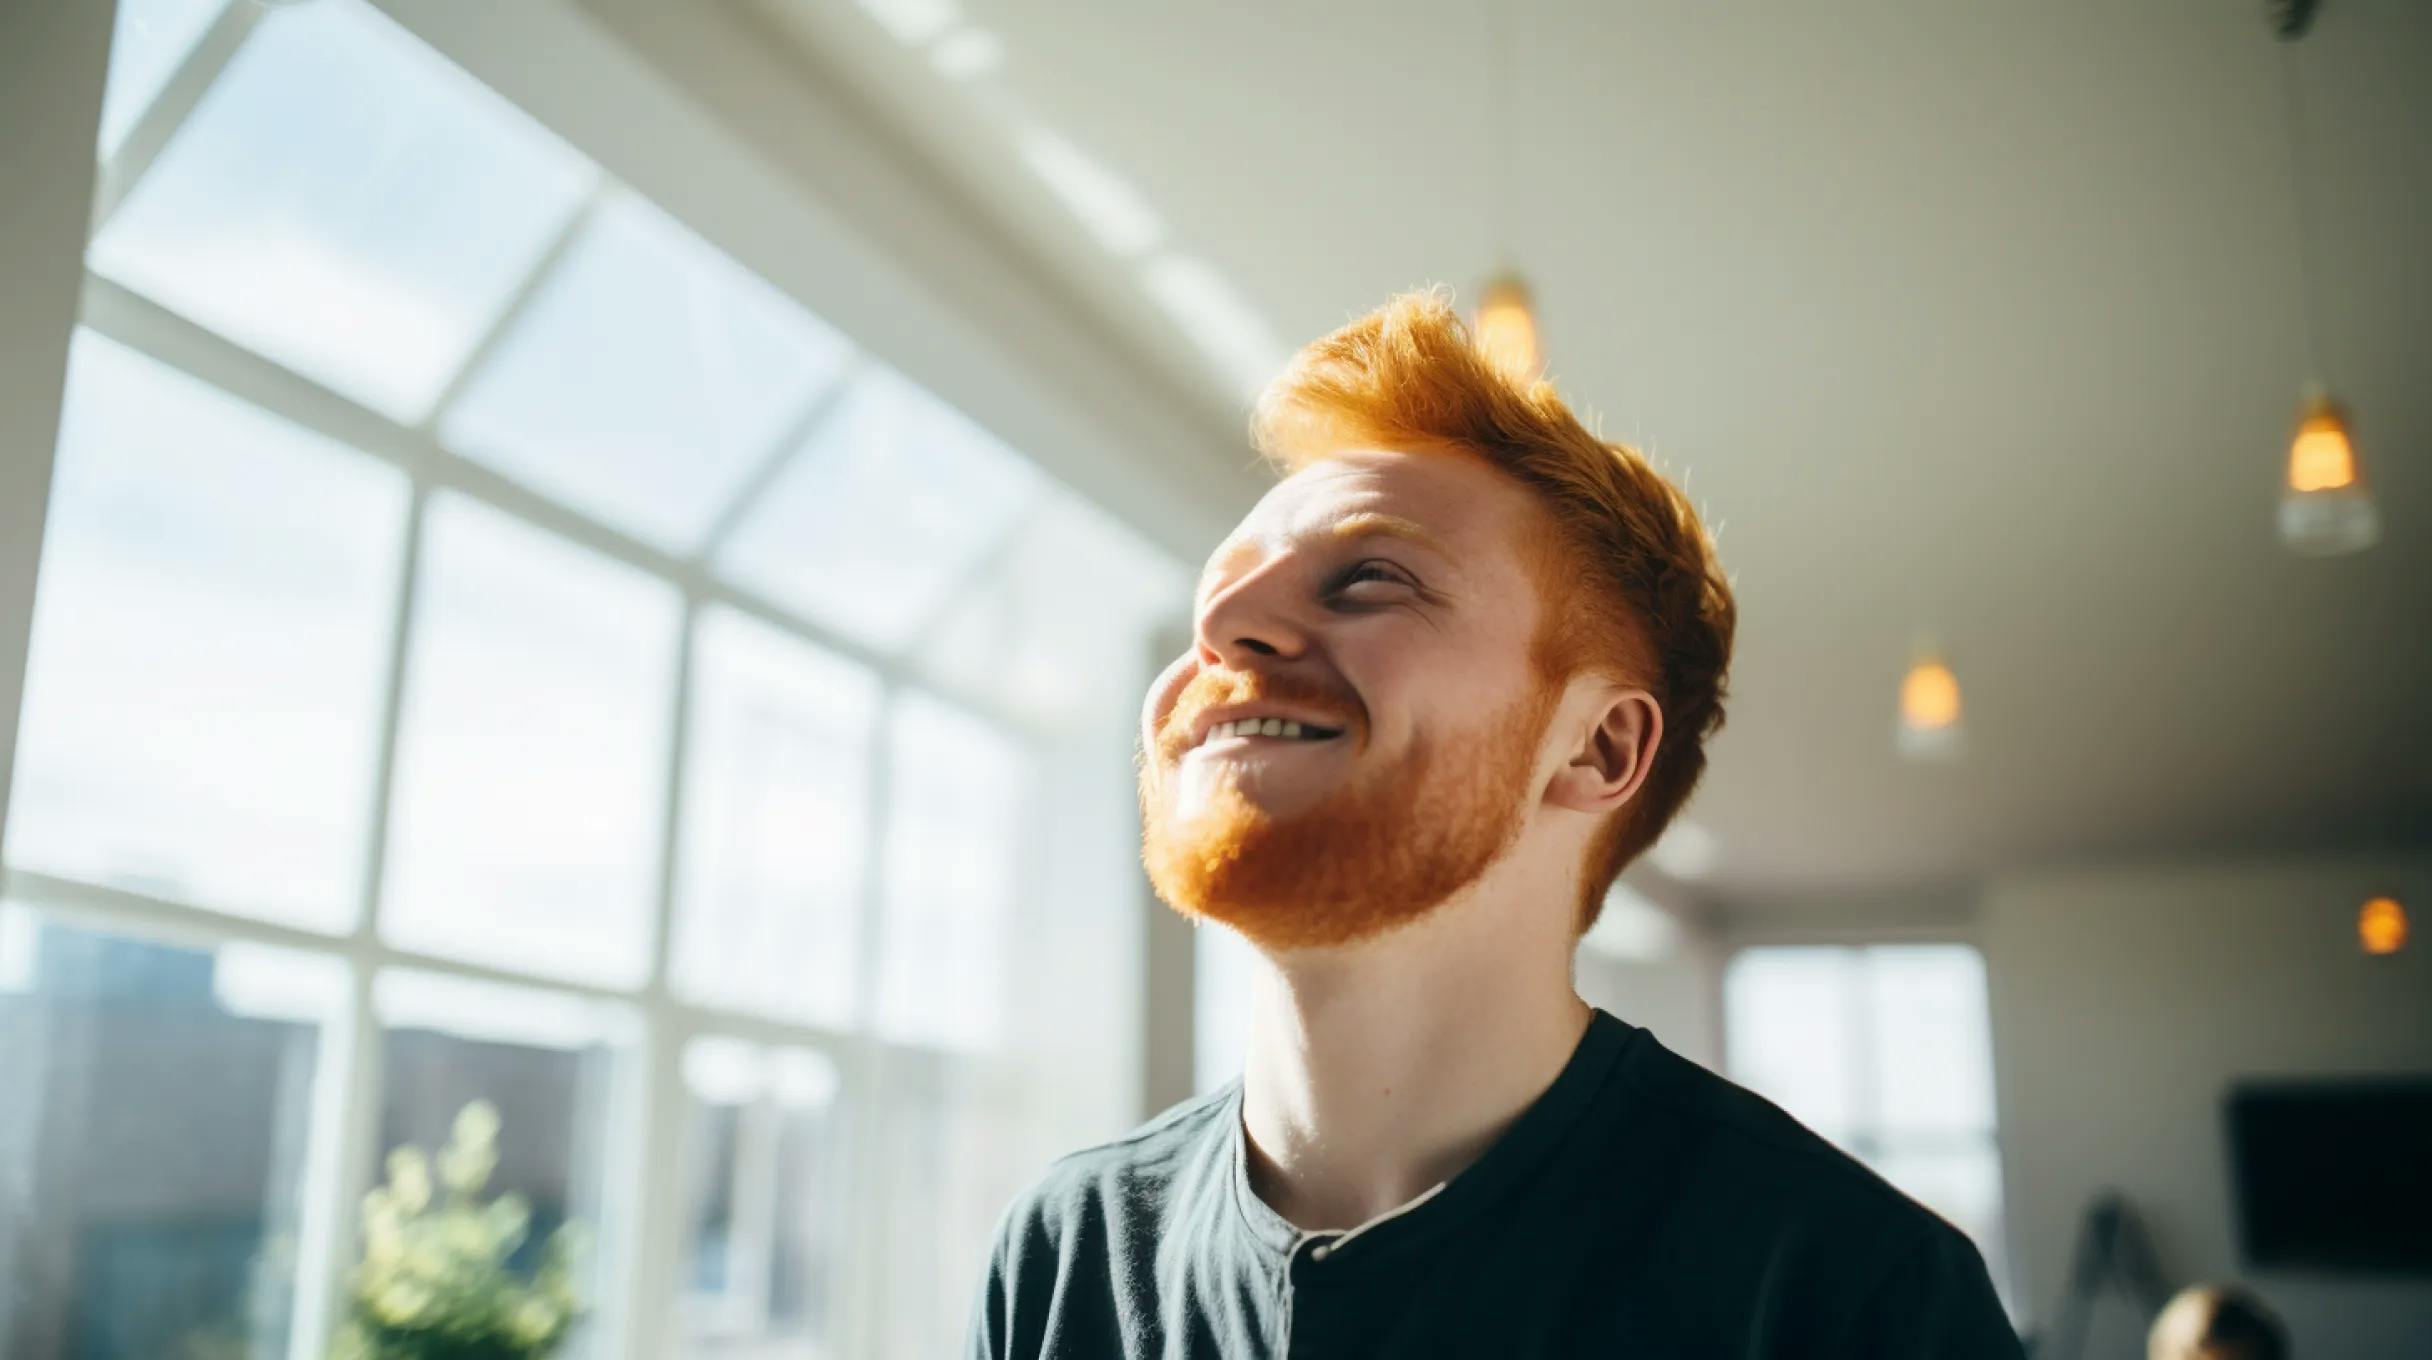 A smiling man with red hair and a beard.